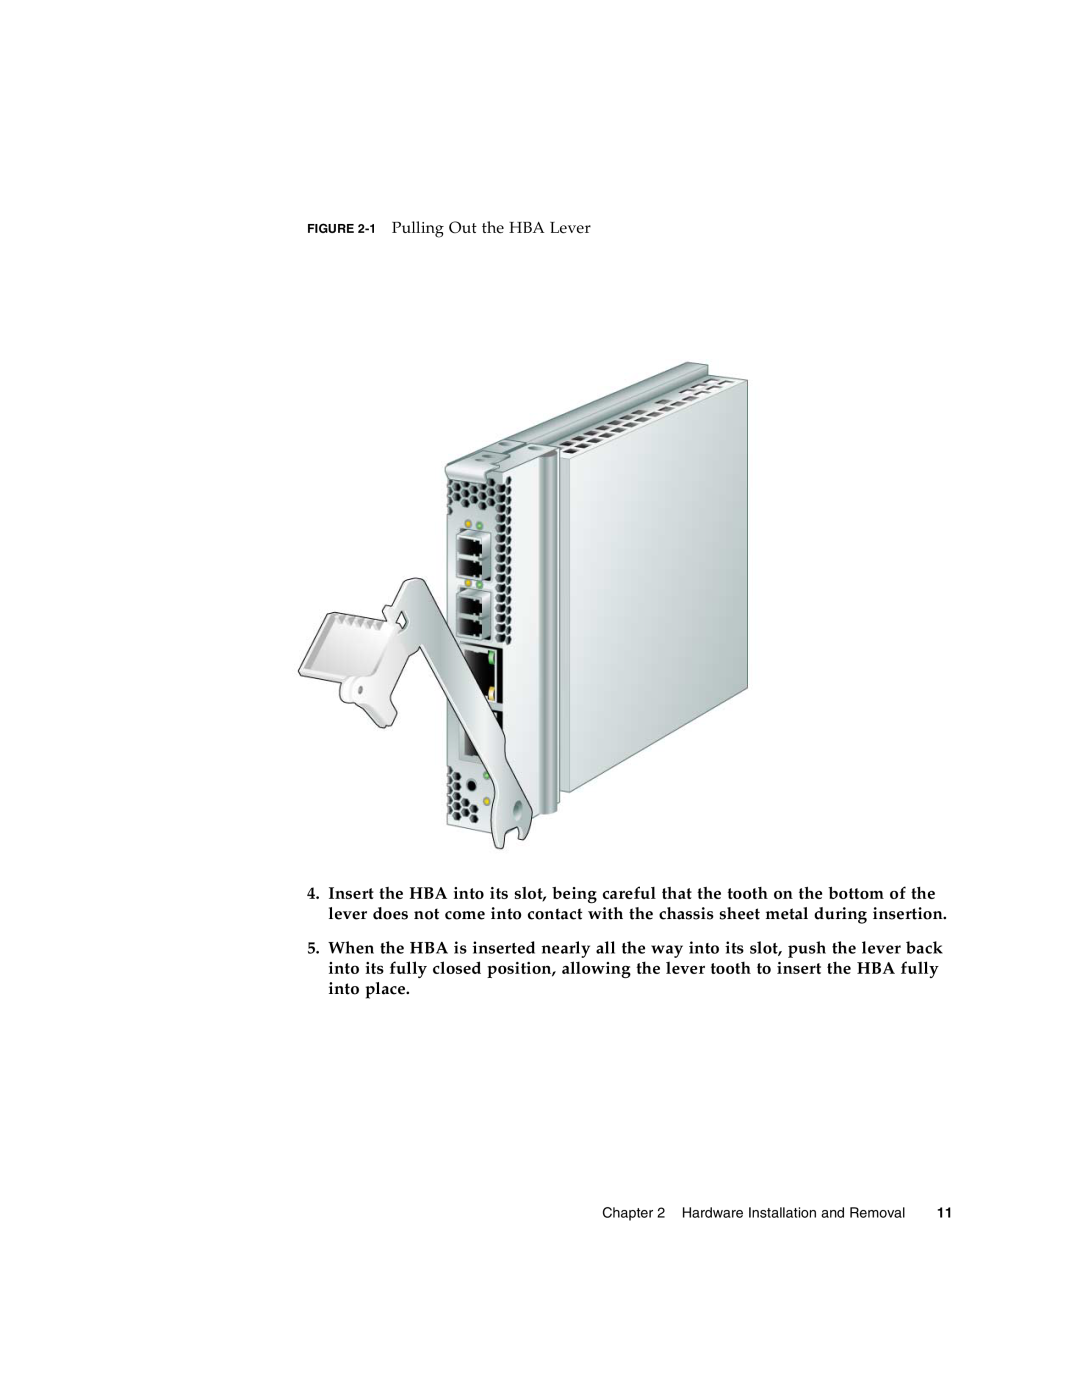 Sun Microsystems SG-XPCIE2FCGBE-E-Z manual 1 Pulling Out the HBA Lever, Hardware Installation and Removal 